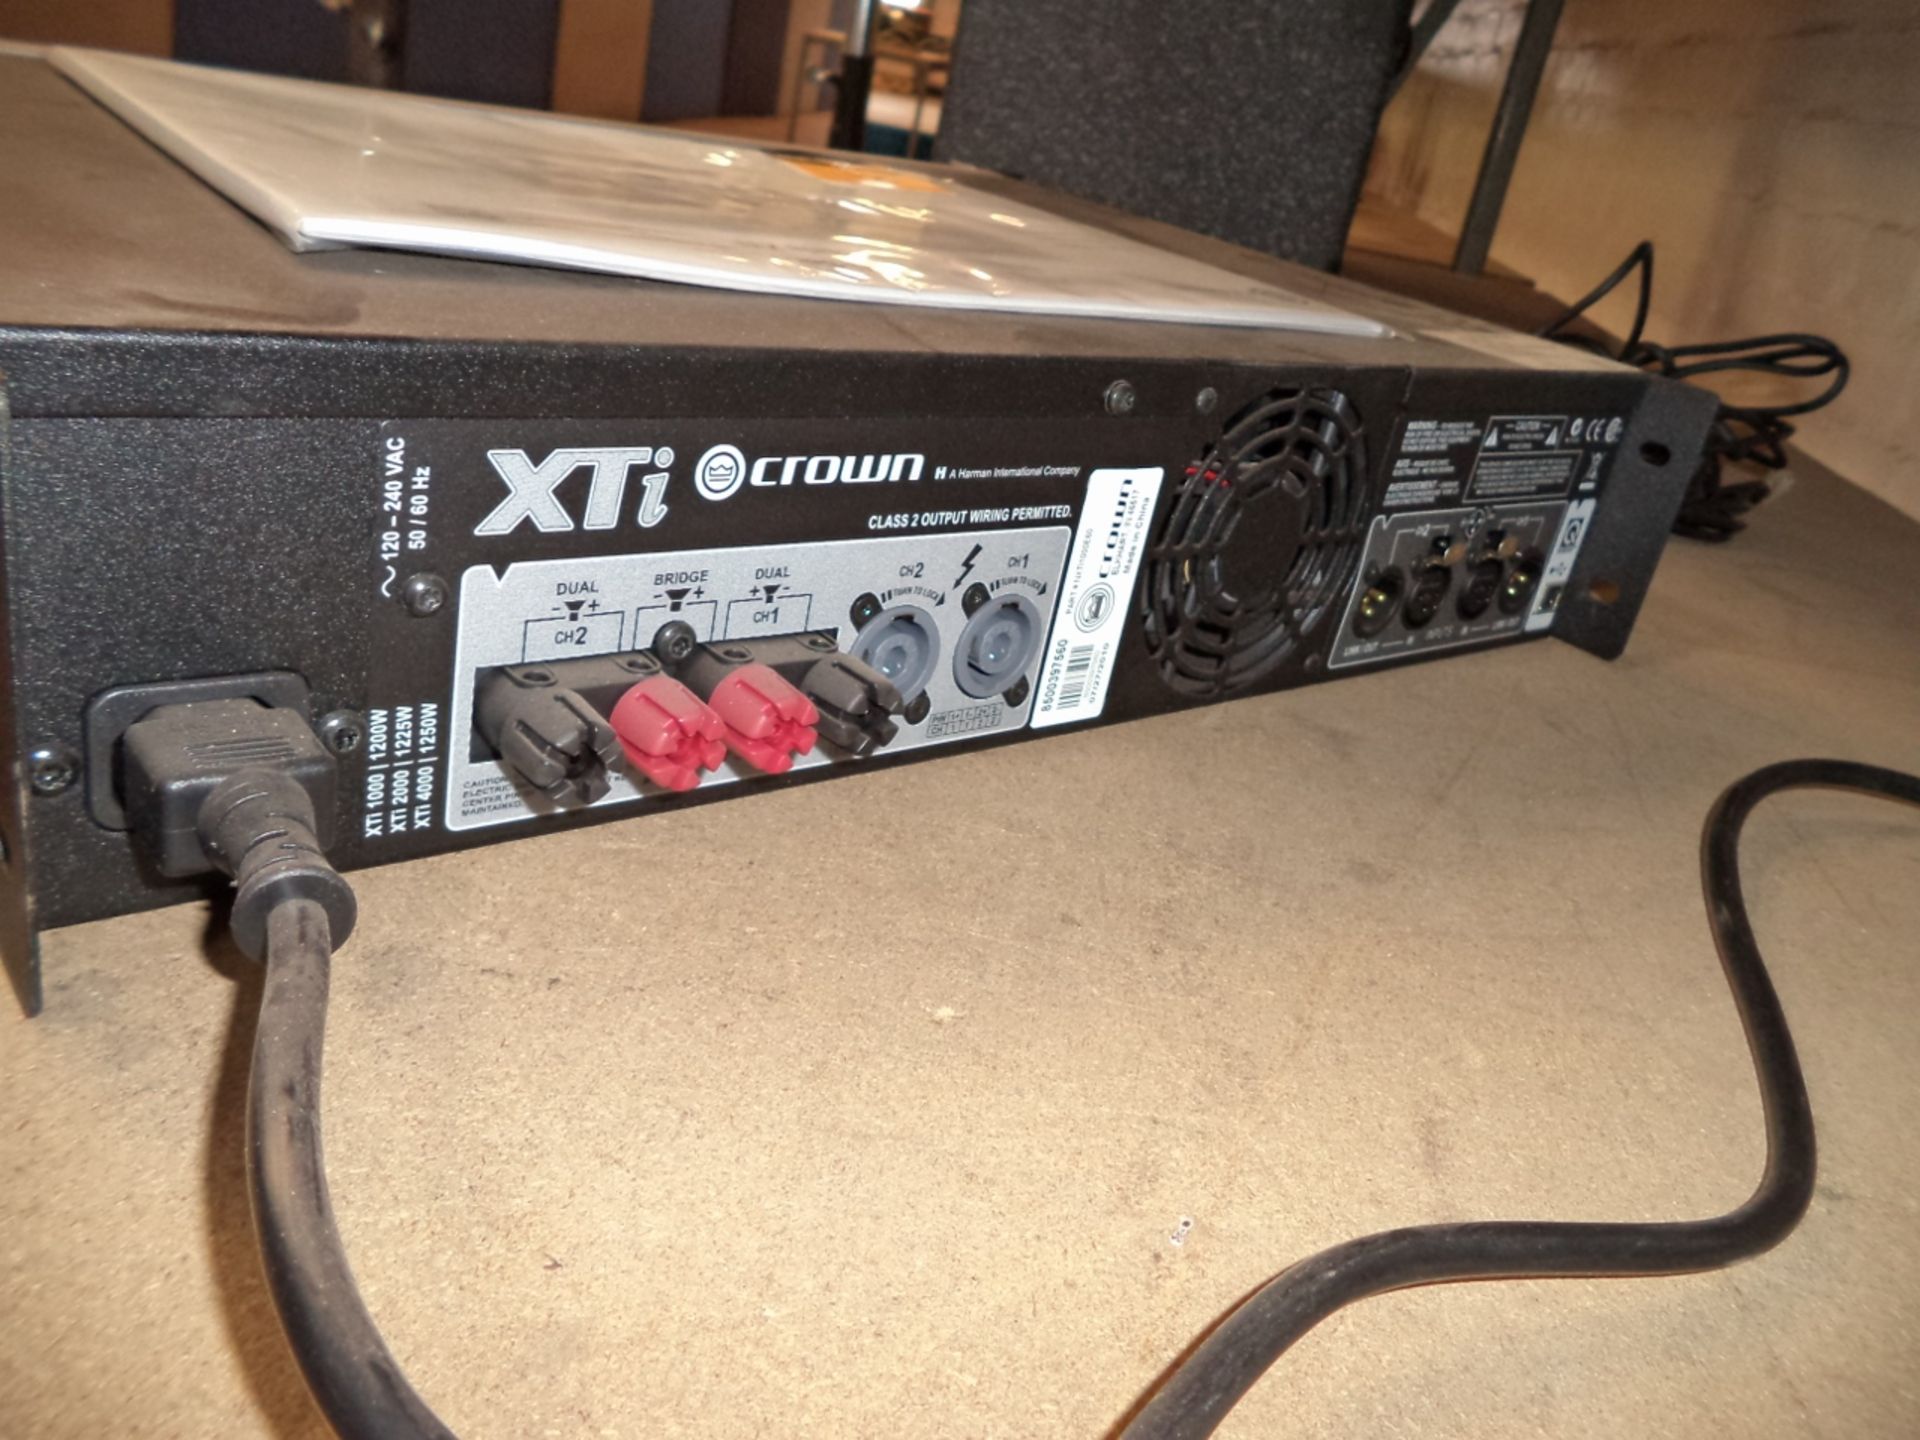 Crown model XTi 1000 rack mountable power amplifier including manual - Image 3 of 4